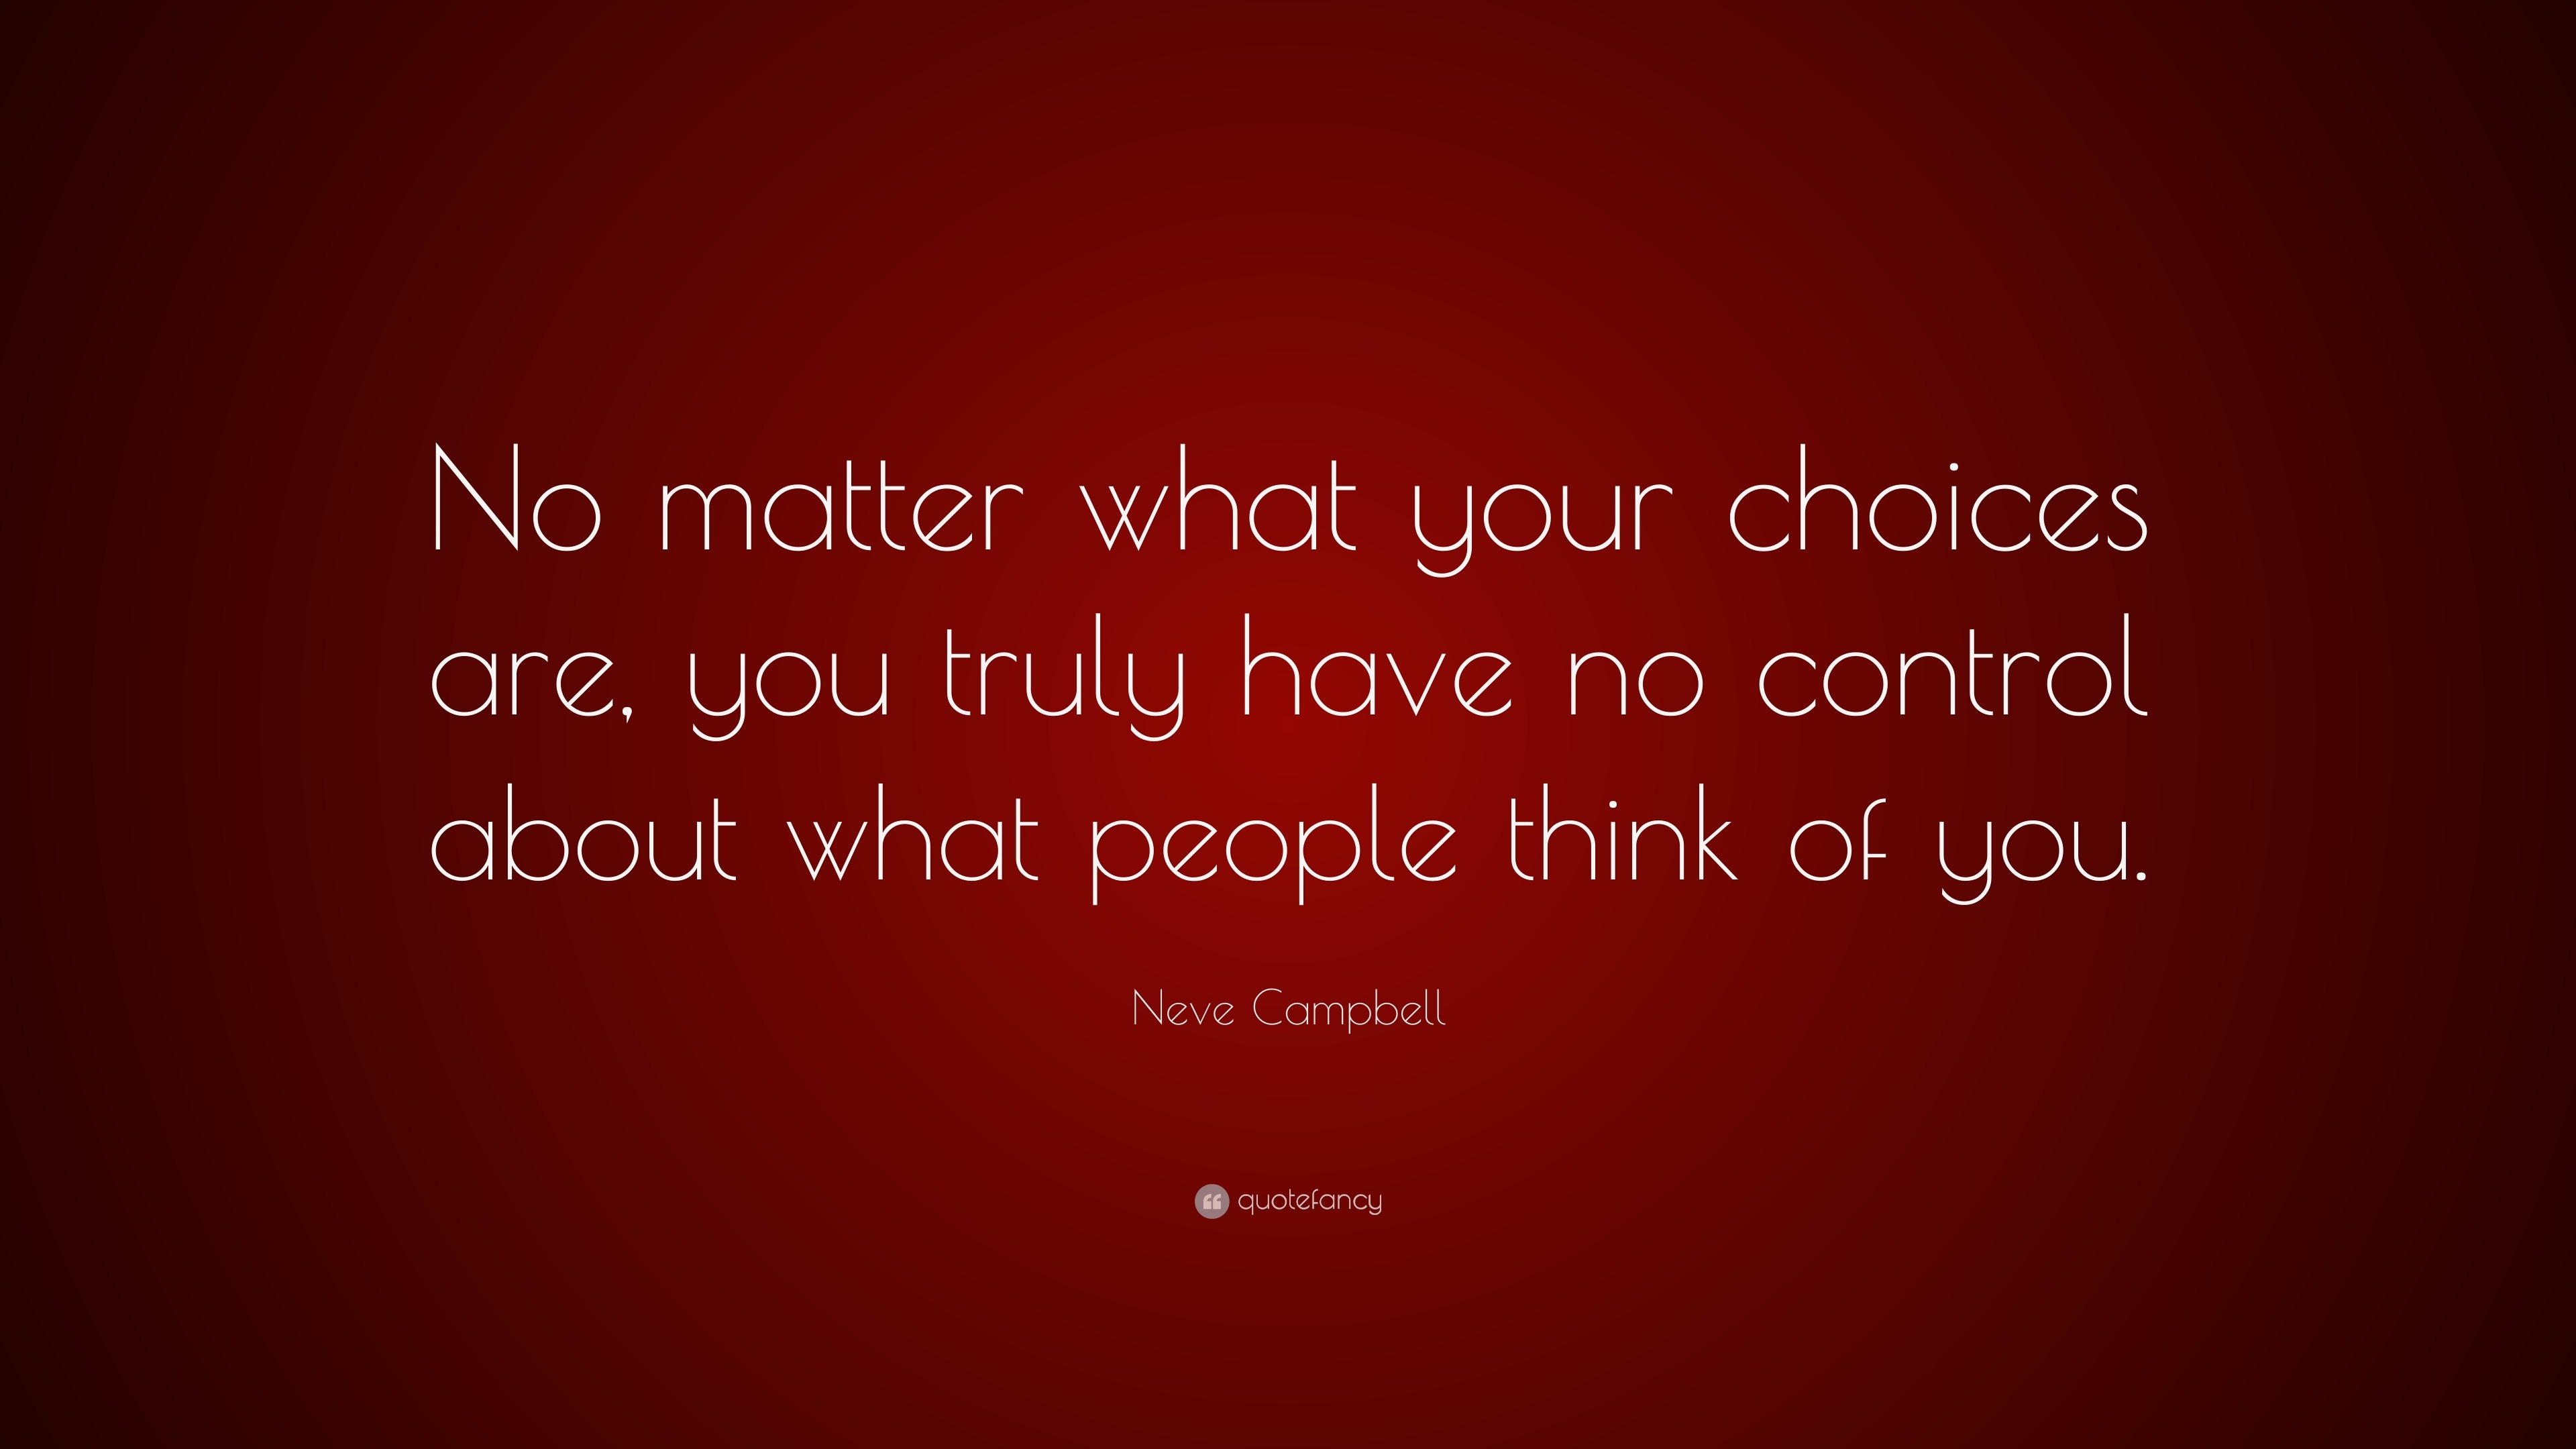 Neve Campbell Quote: “No matter what your choices are, you truly have ...